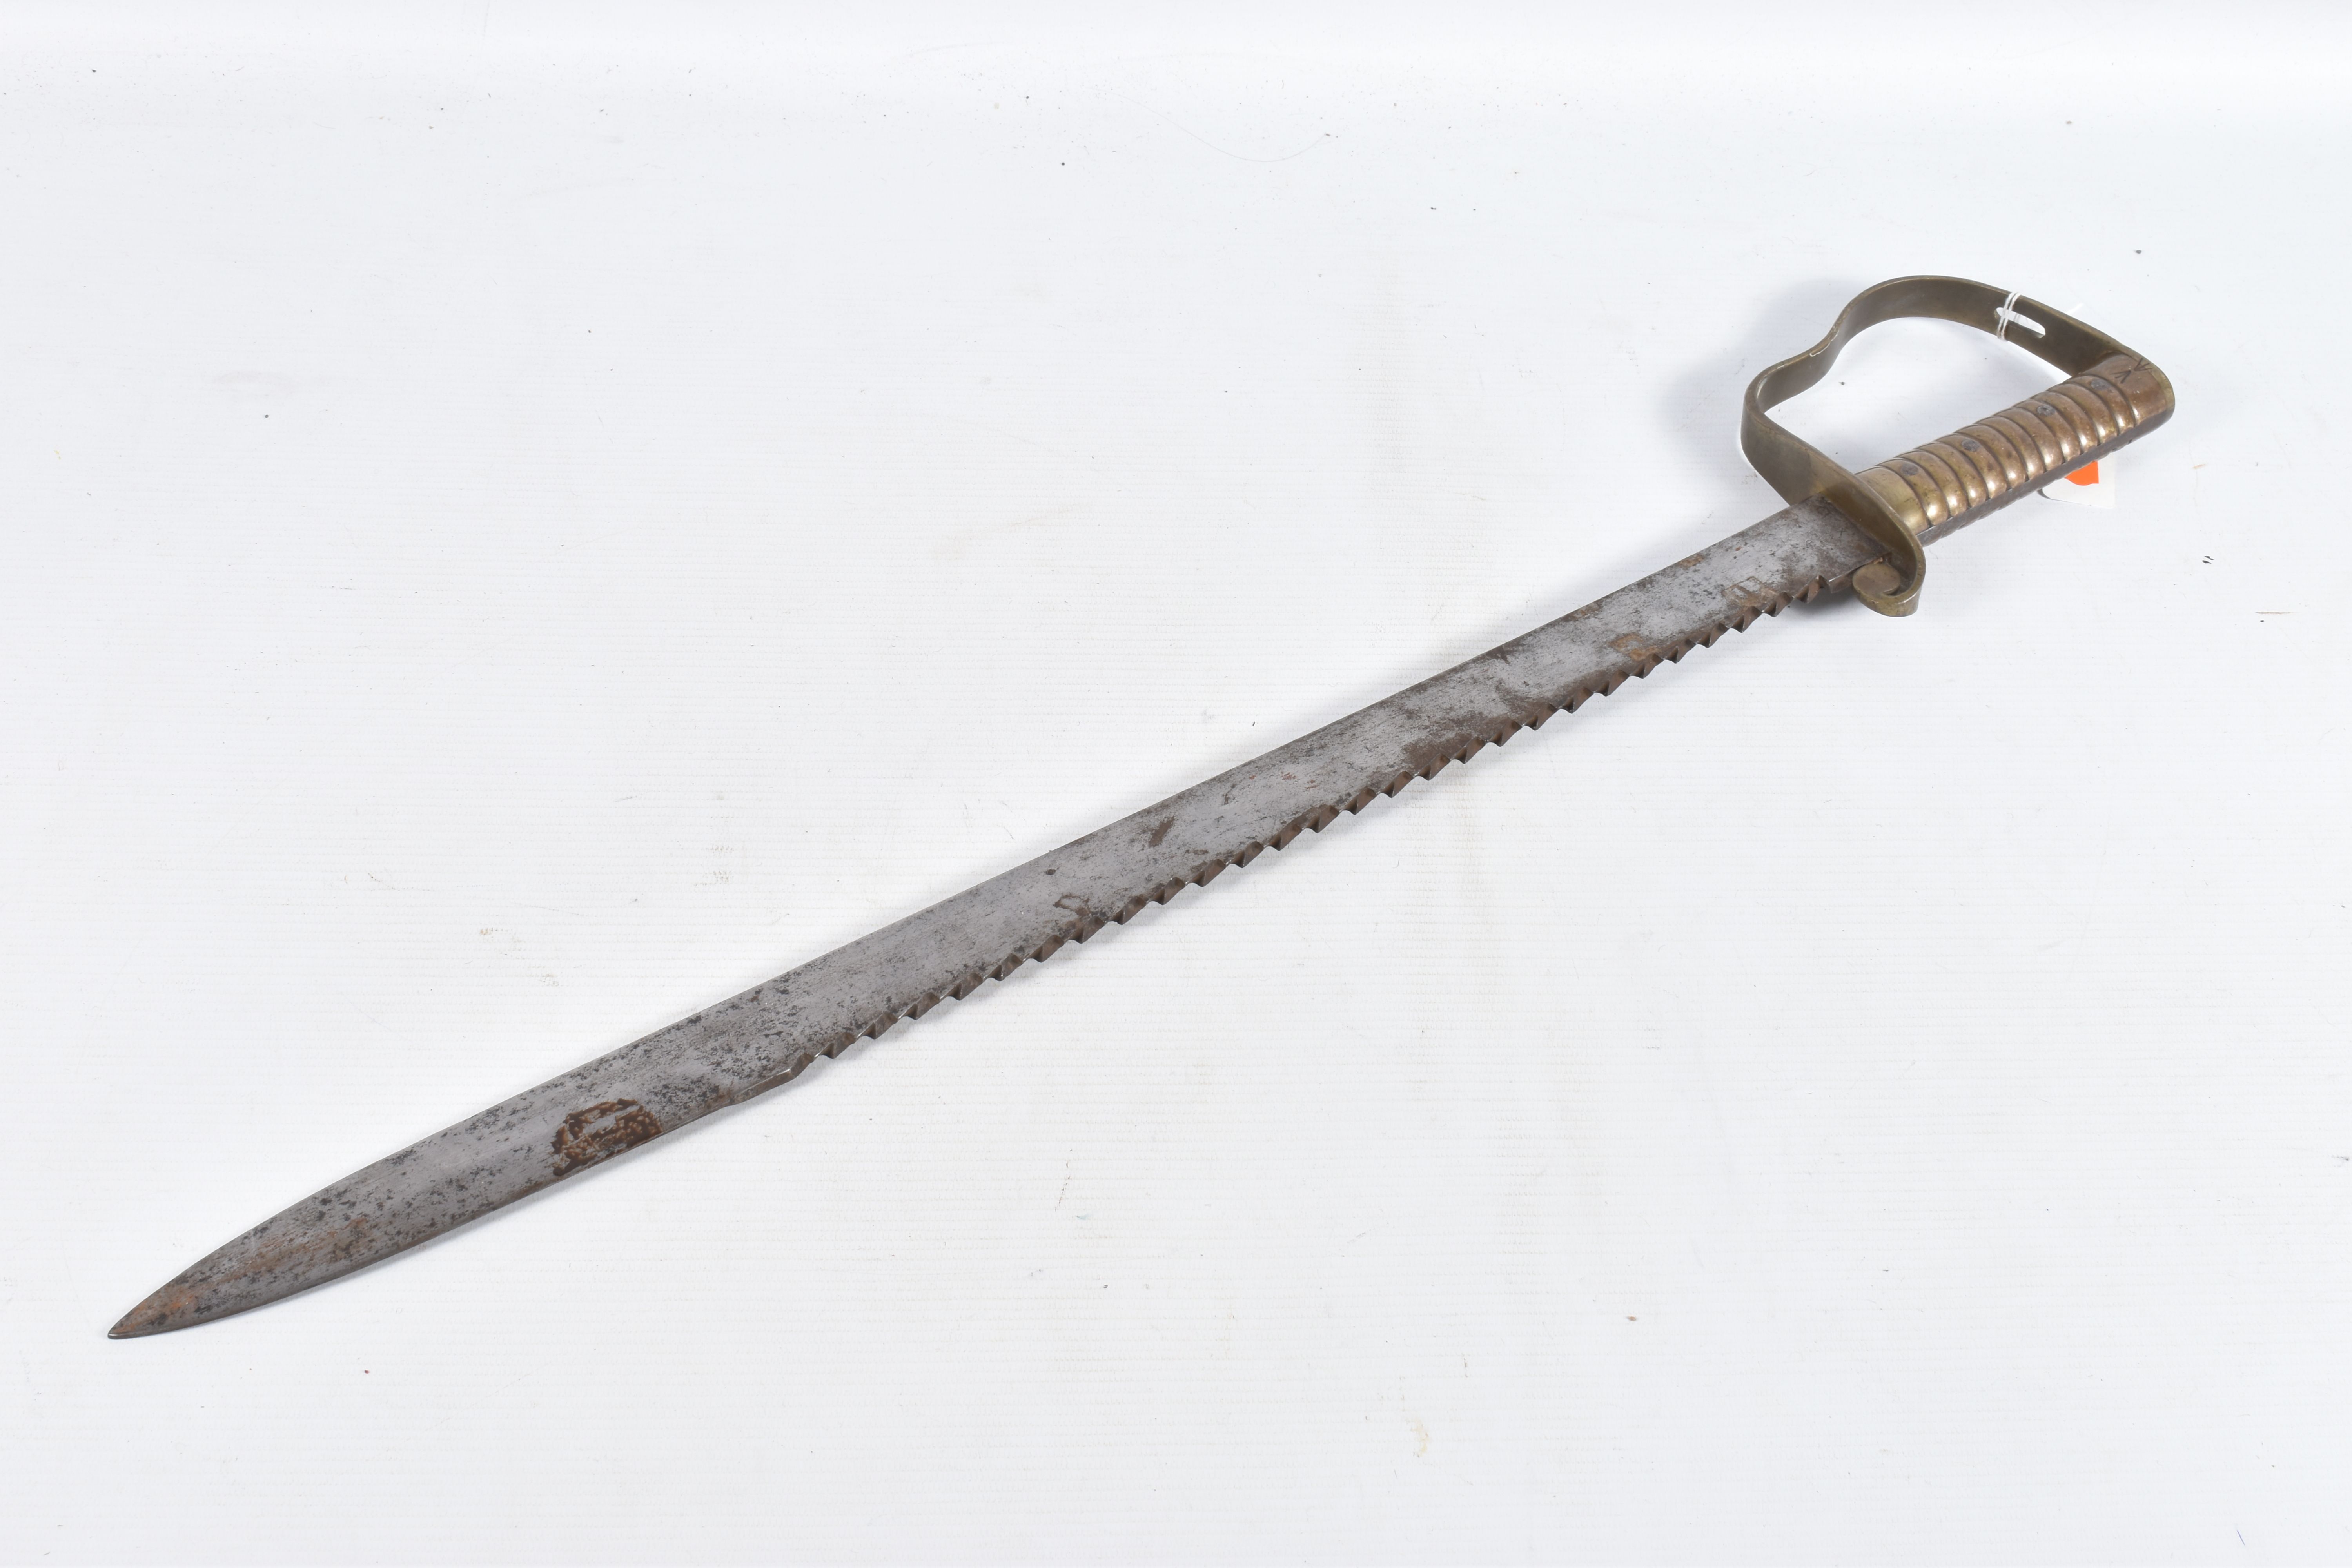 A BRITISH 19TH CENTURY WILKINSON PIONEERS SAW BACK SWORD ,one side of the blade features a broad